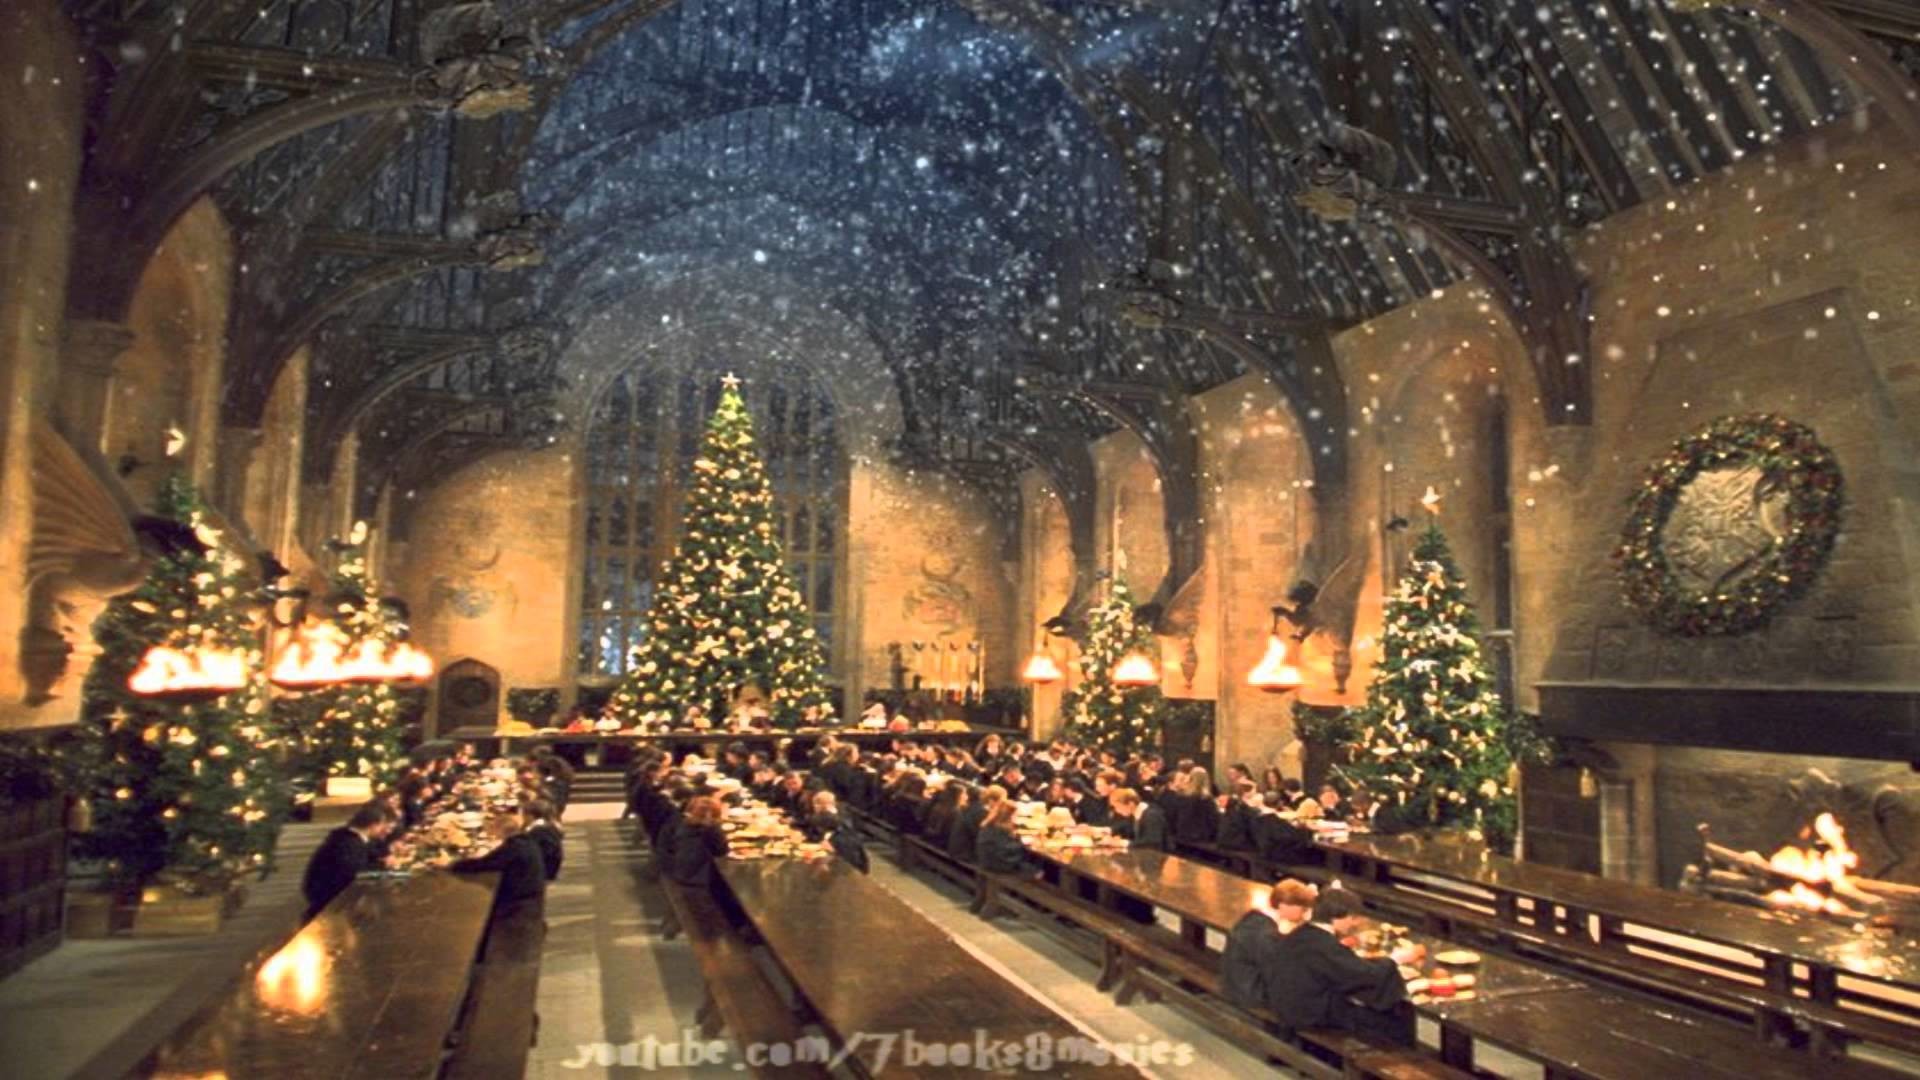 Hogwarts Wallpapers 75 pictures